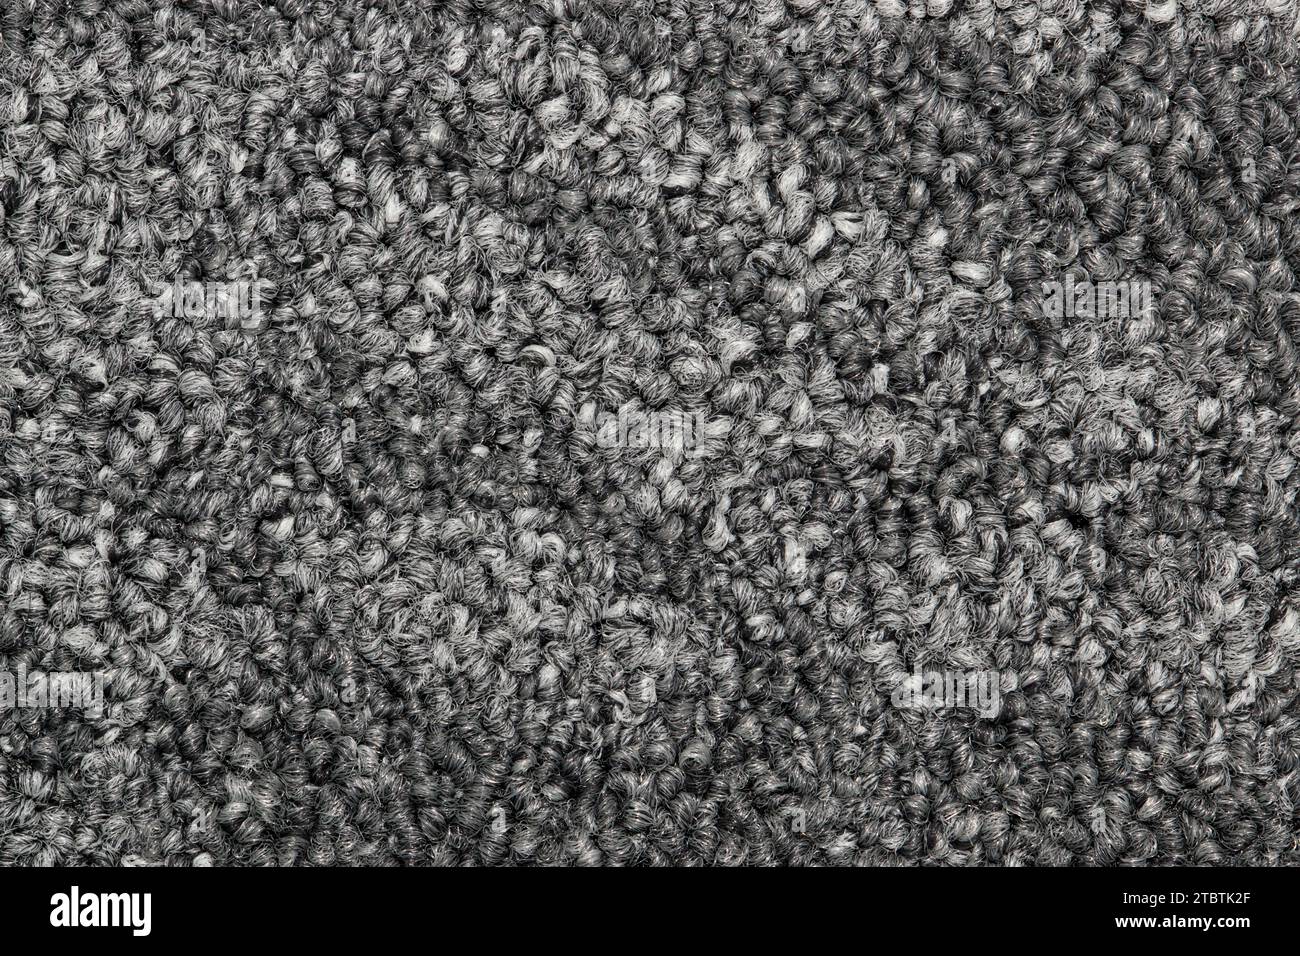 Dark gray color two tone swatch section of carpet sample, closeup directly above full frame image. Stock Photo